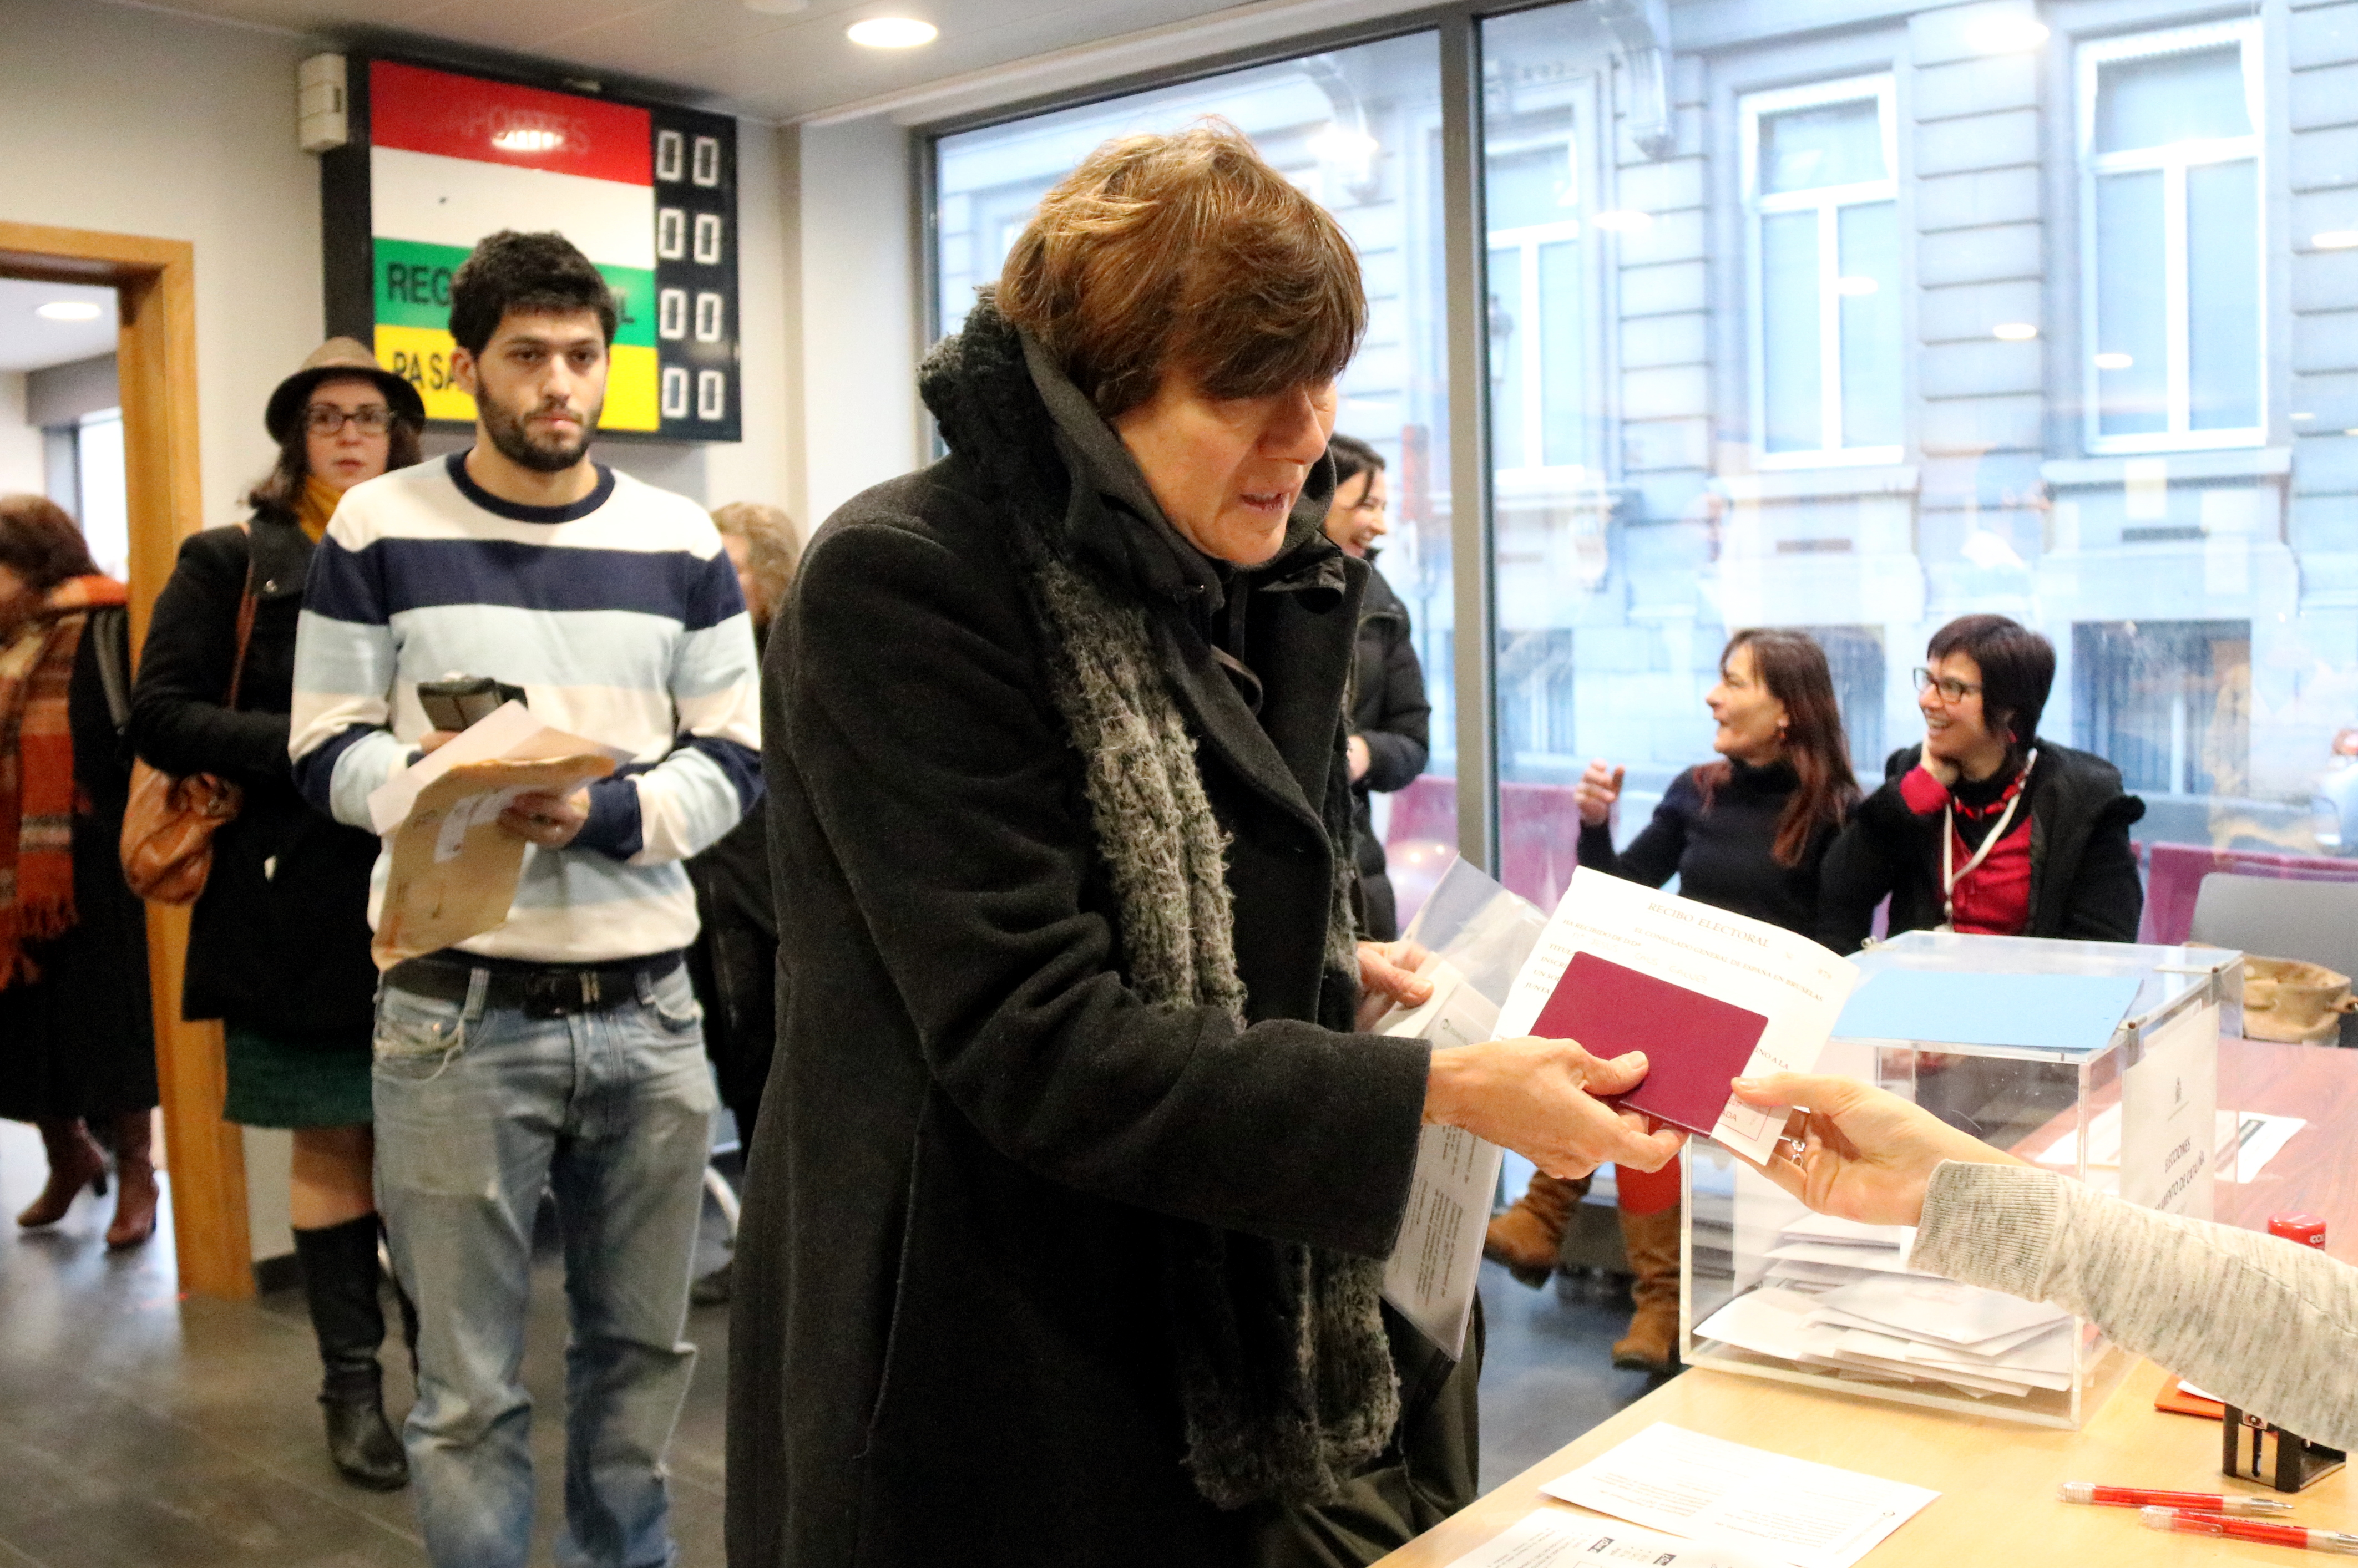 A woman collecting her documentation after voting in Brussels (by ACN)